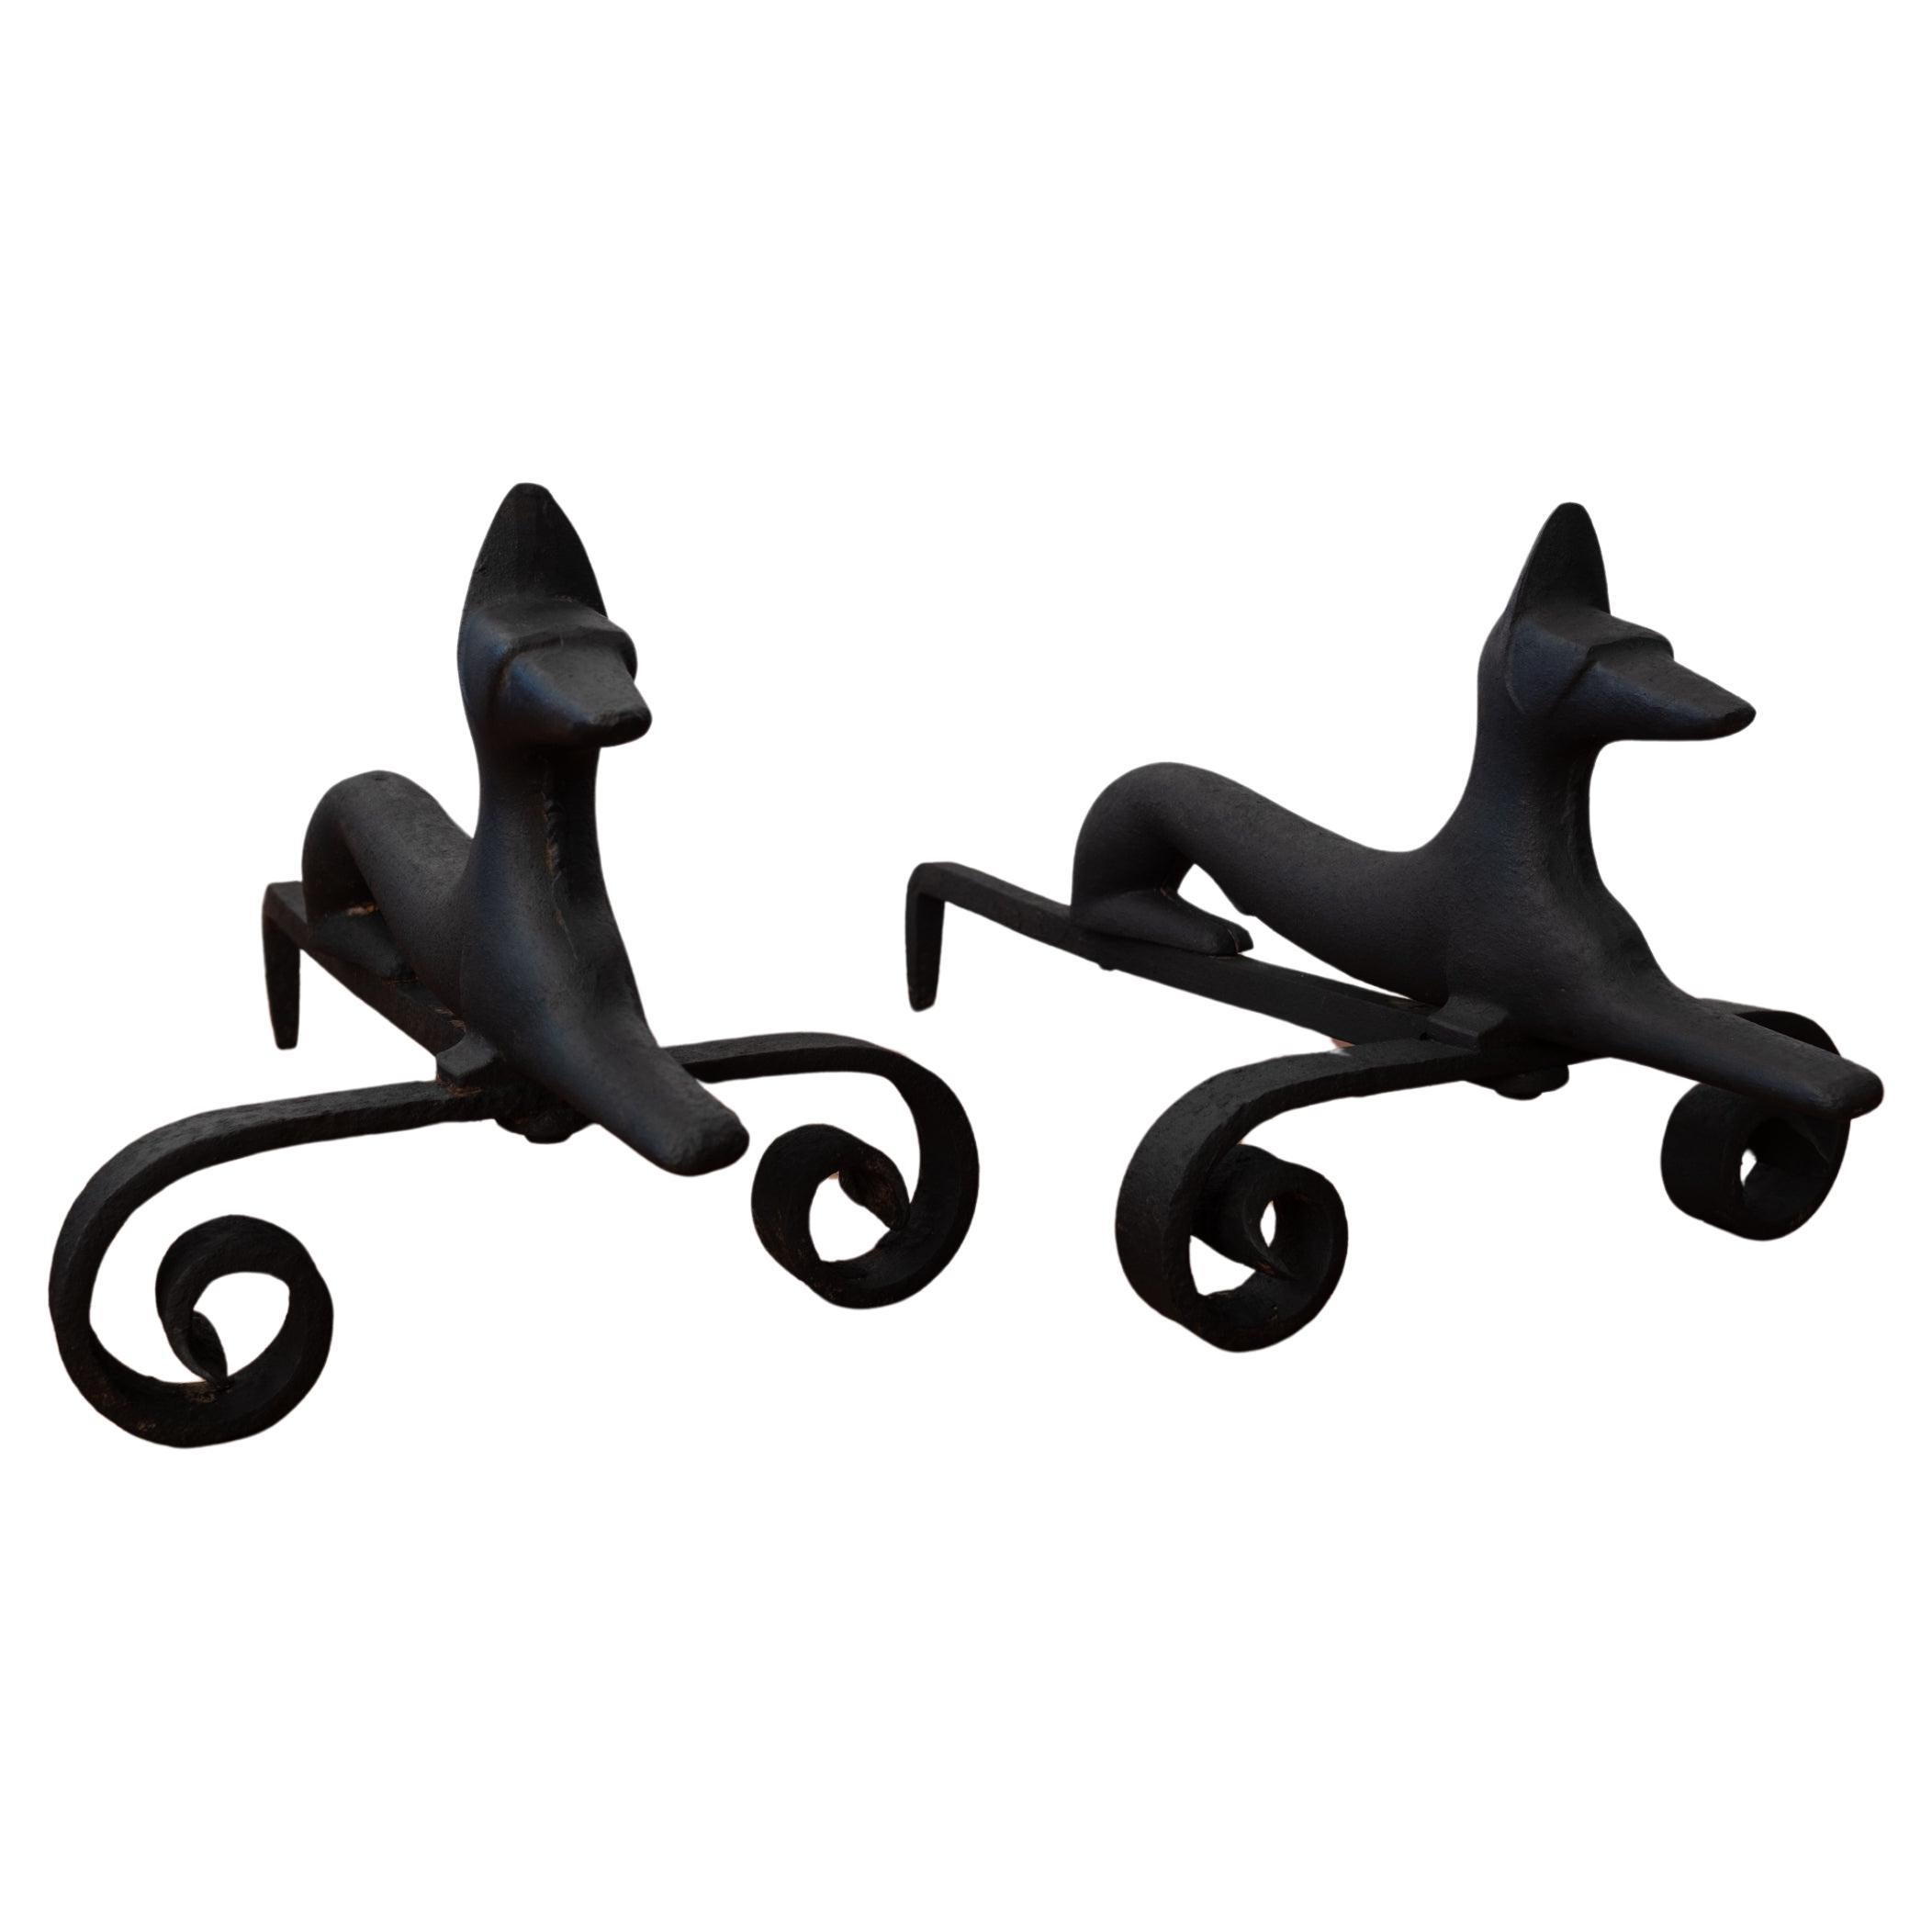 Modernist Andirons Fire Dogs, 1940s